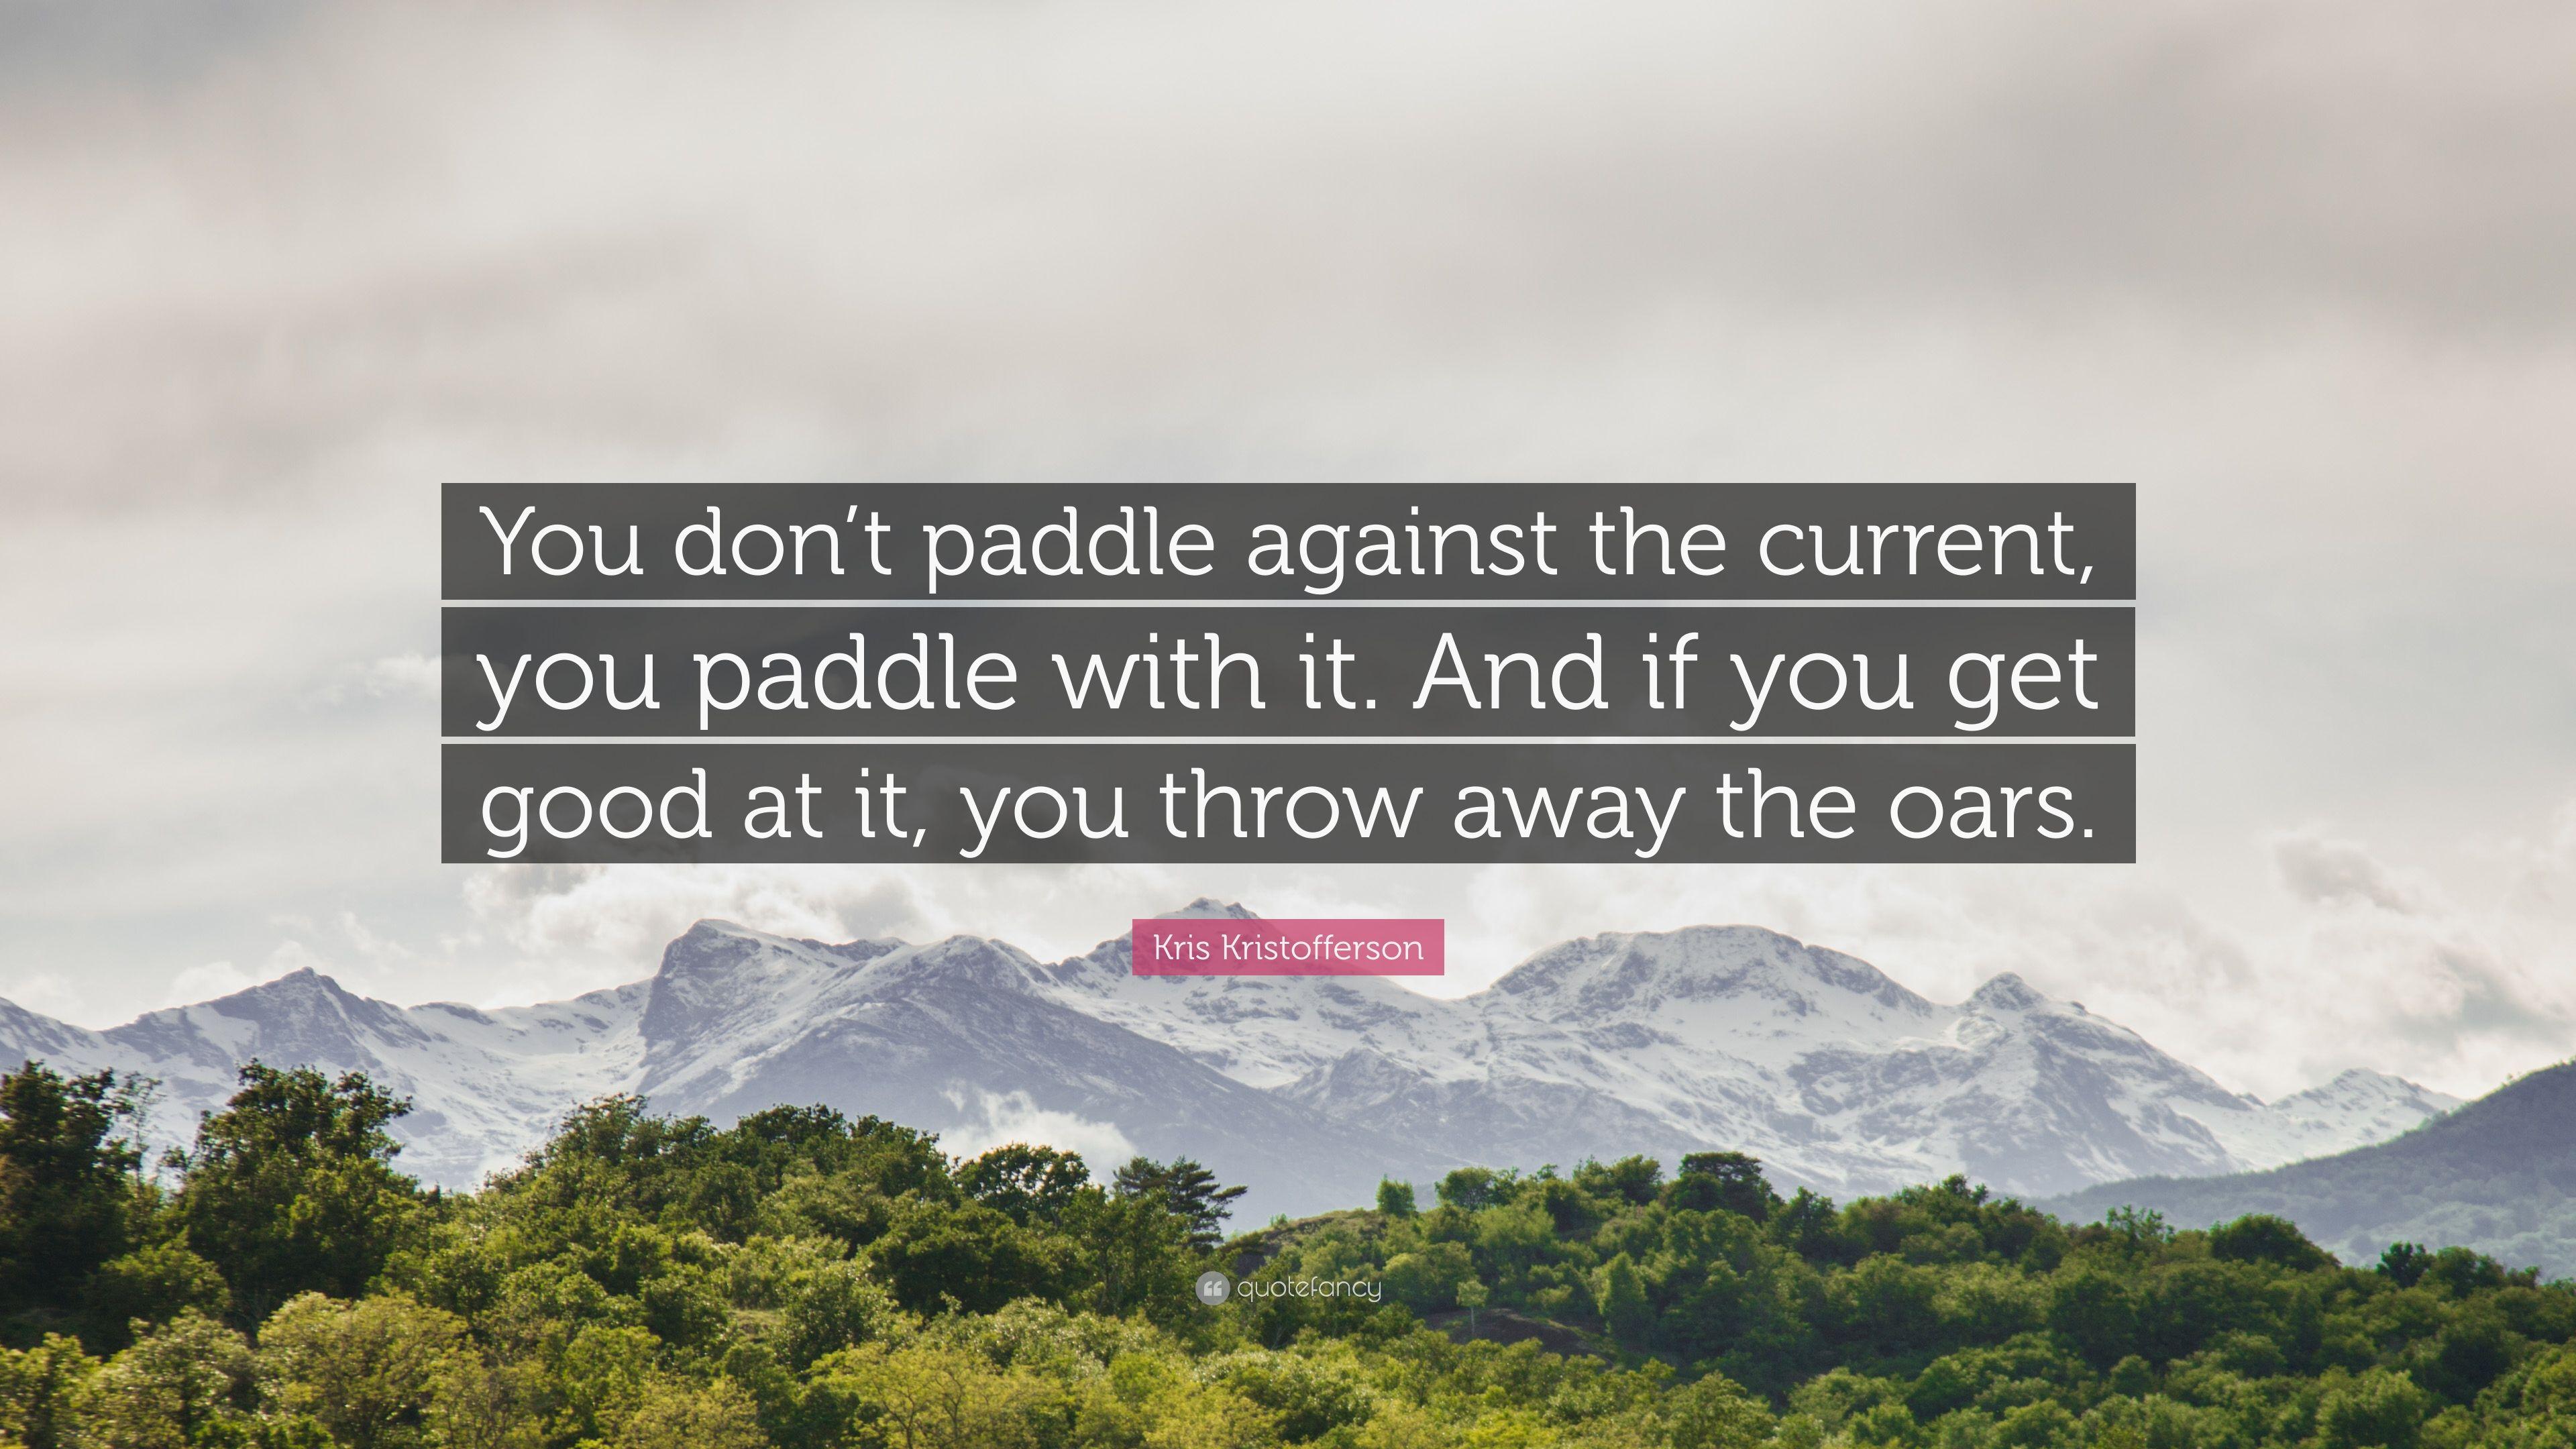 Kris Kristofferson Quote: “You don't paddle against the current